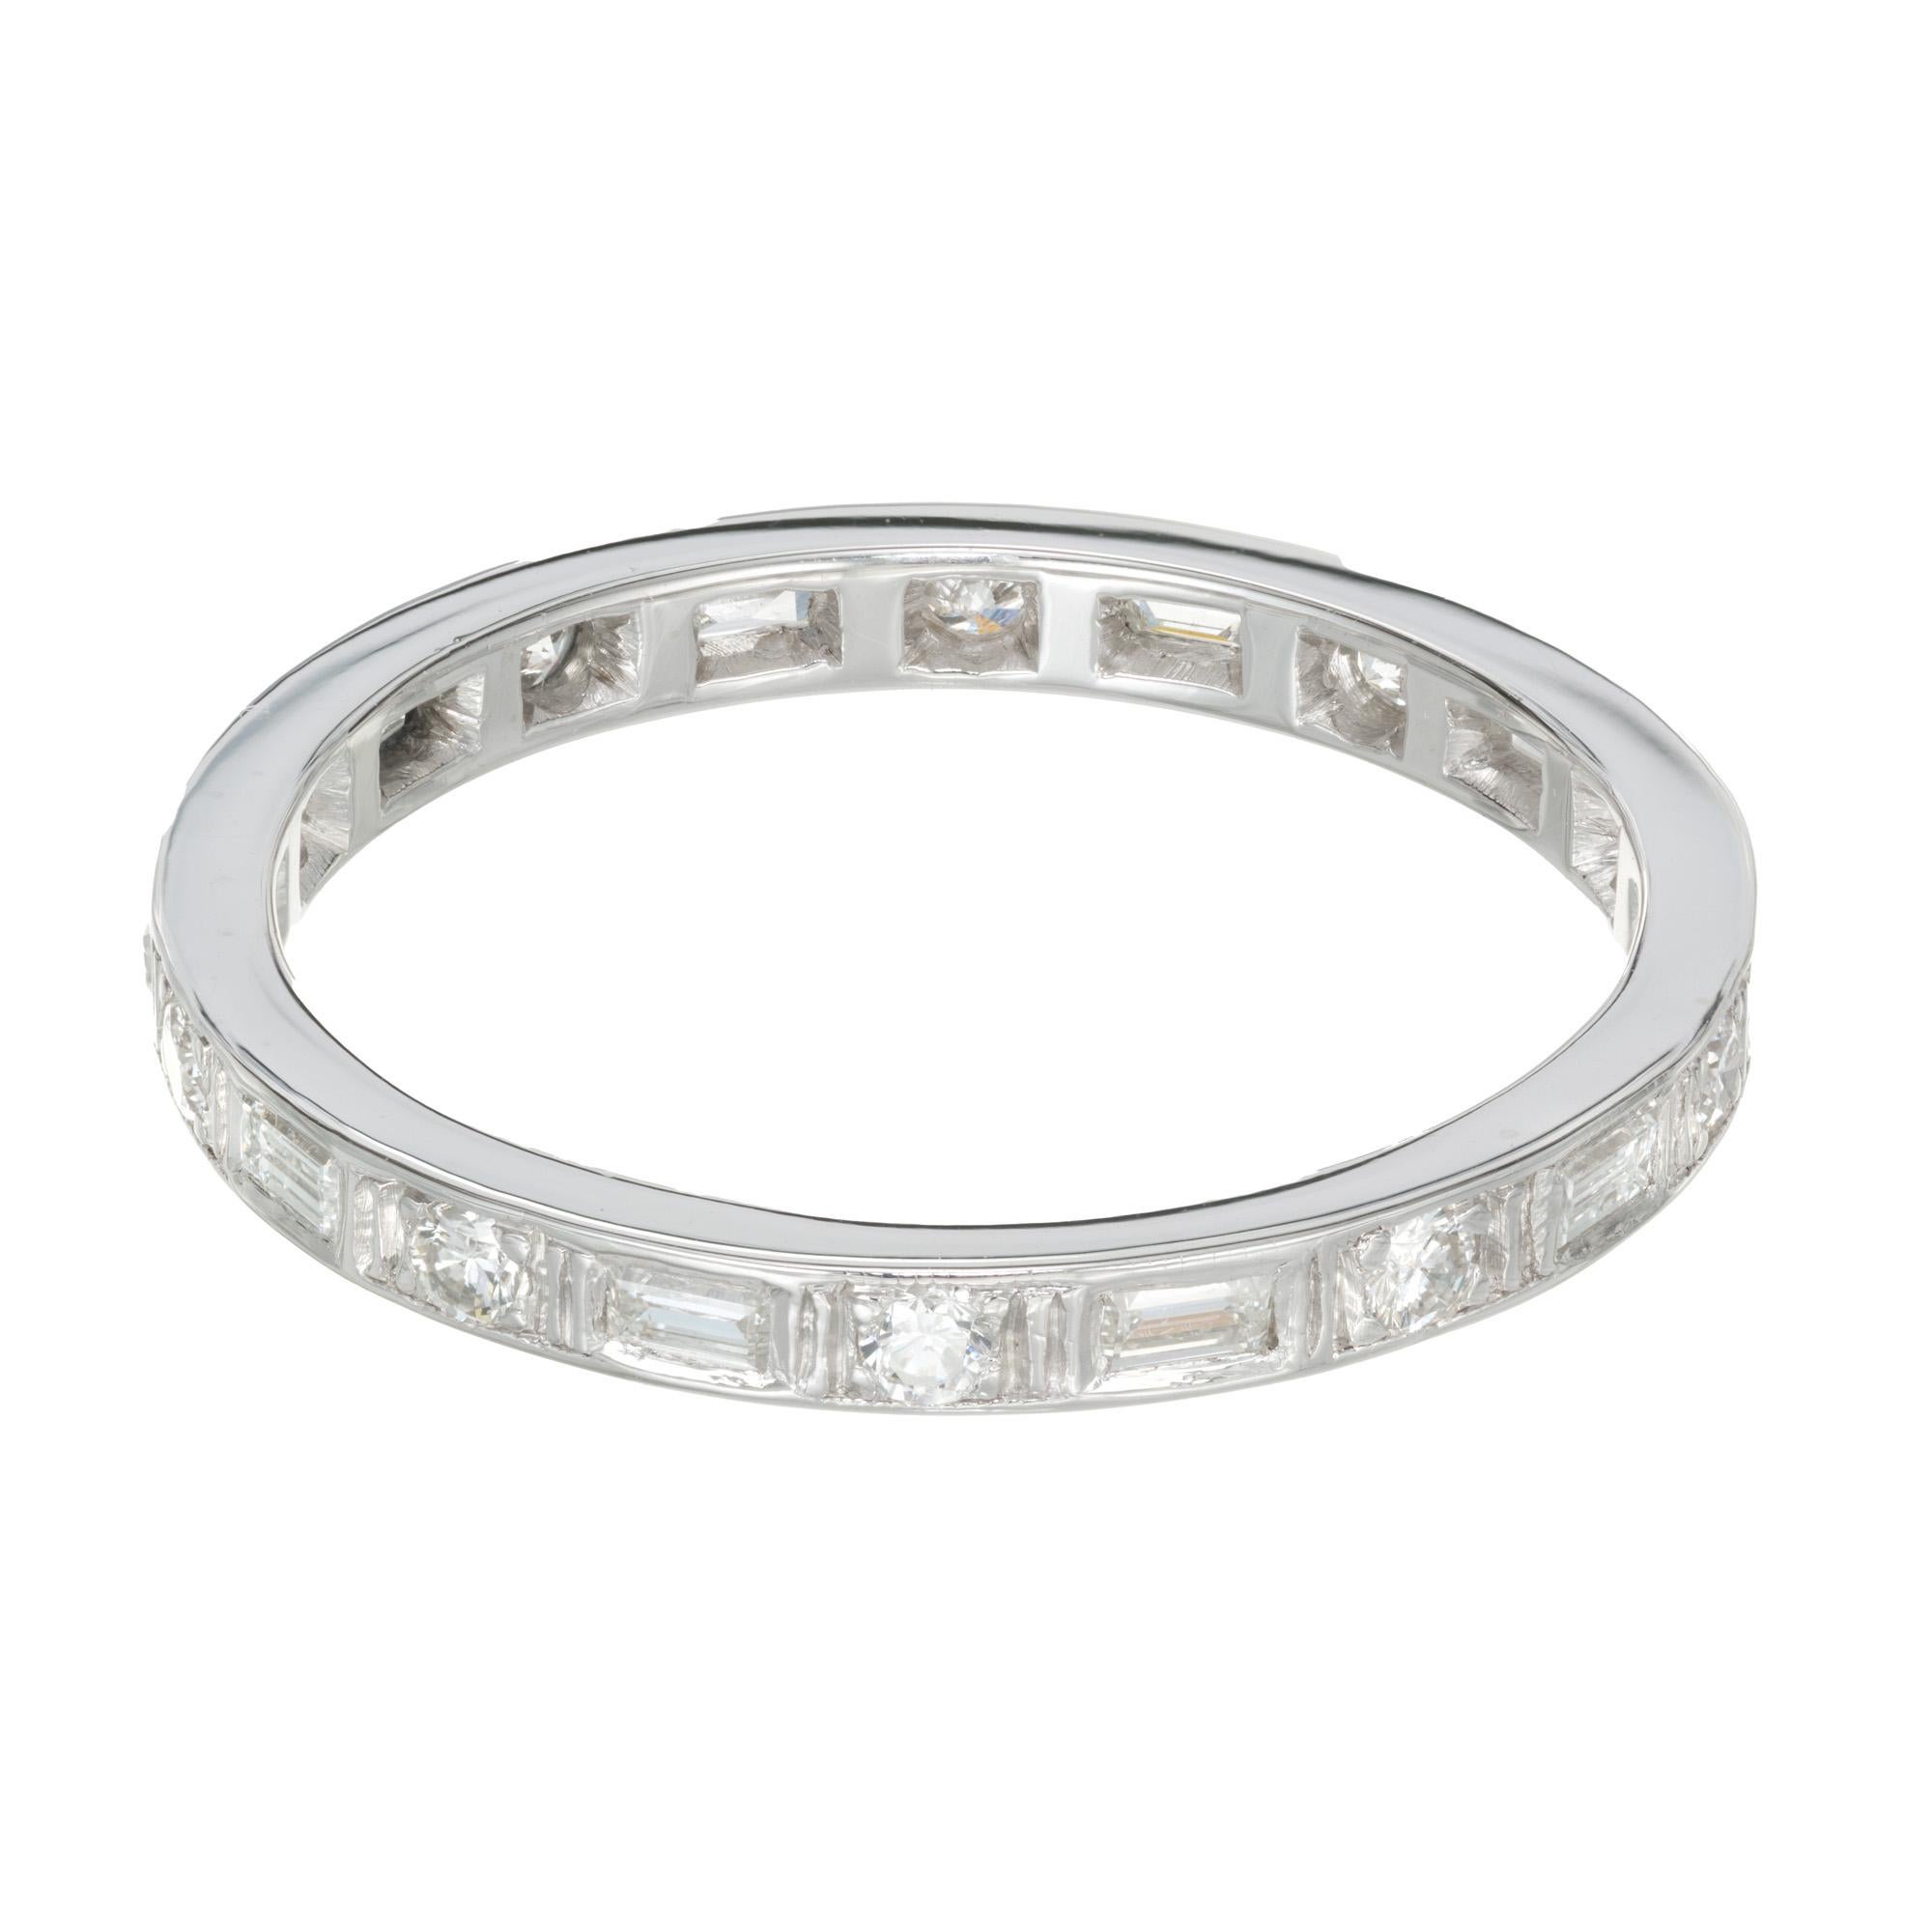 .70 Carat Diamond Platinum Eternity Wedding Band Ring In Good Condition For Sale In Stamford, CT